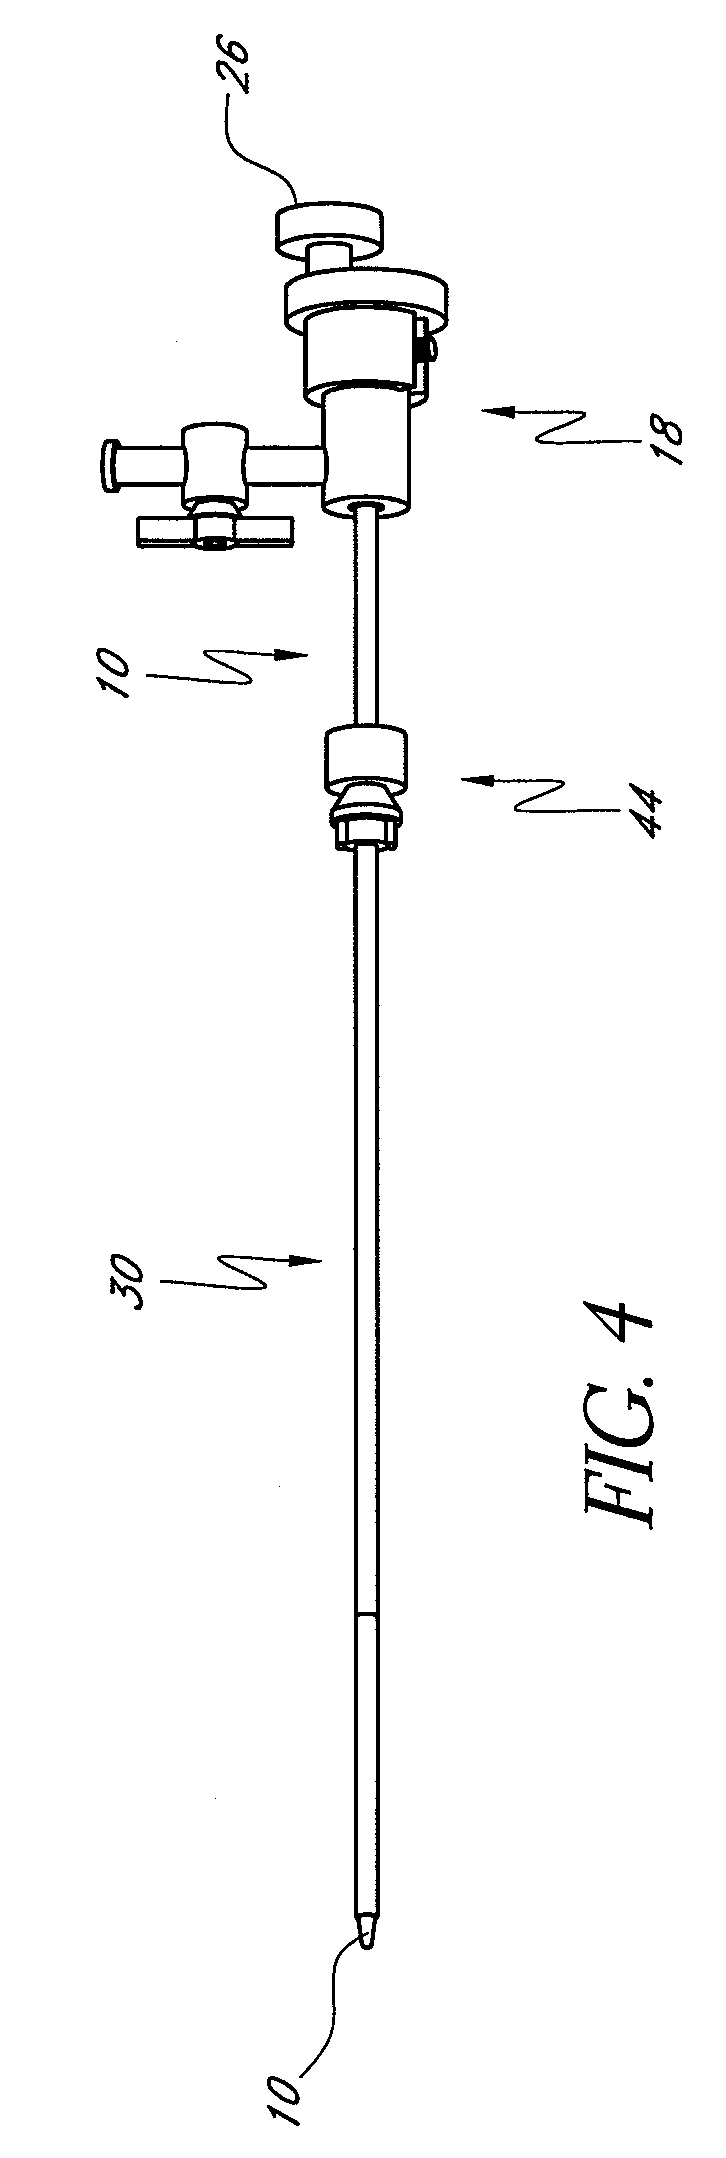 Steerable vertebroplasty system with cavity creation element